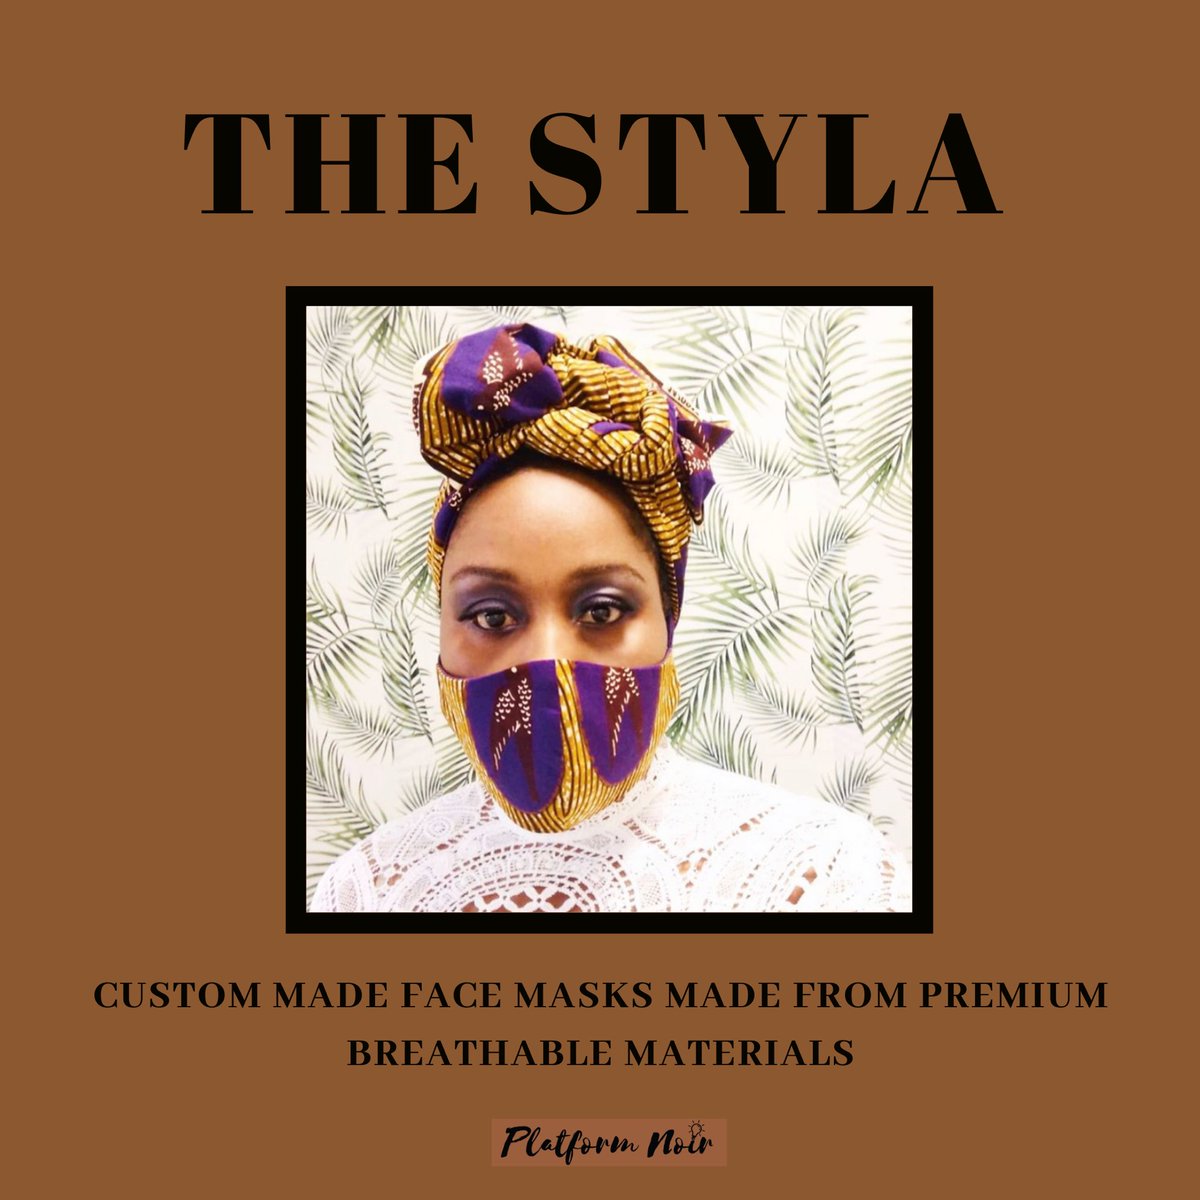 The StylaCustom made face masks made from premium, breathable material https://instagram.com/thestyladotcom?igshid=1h6f2blqmoim0